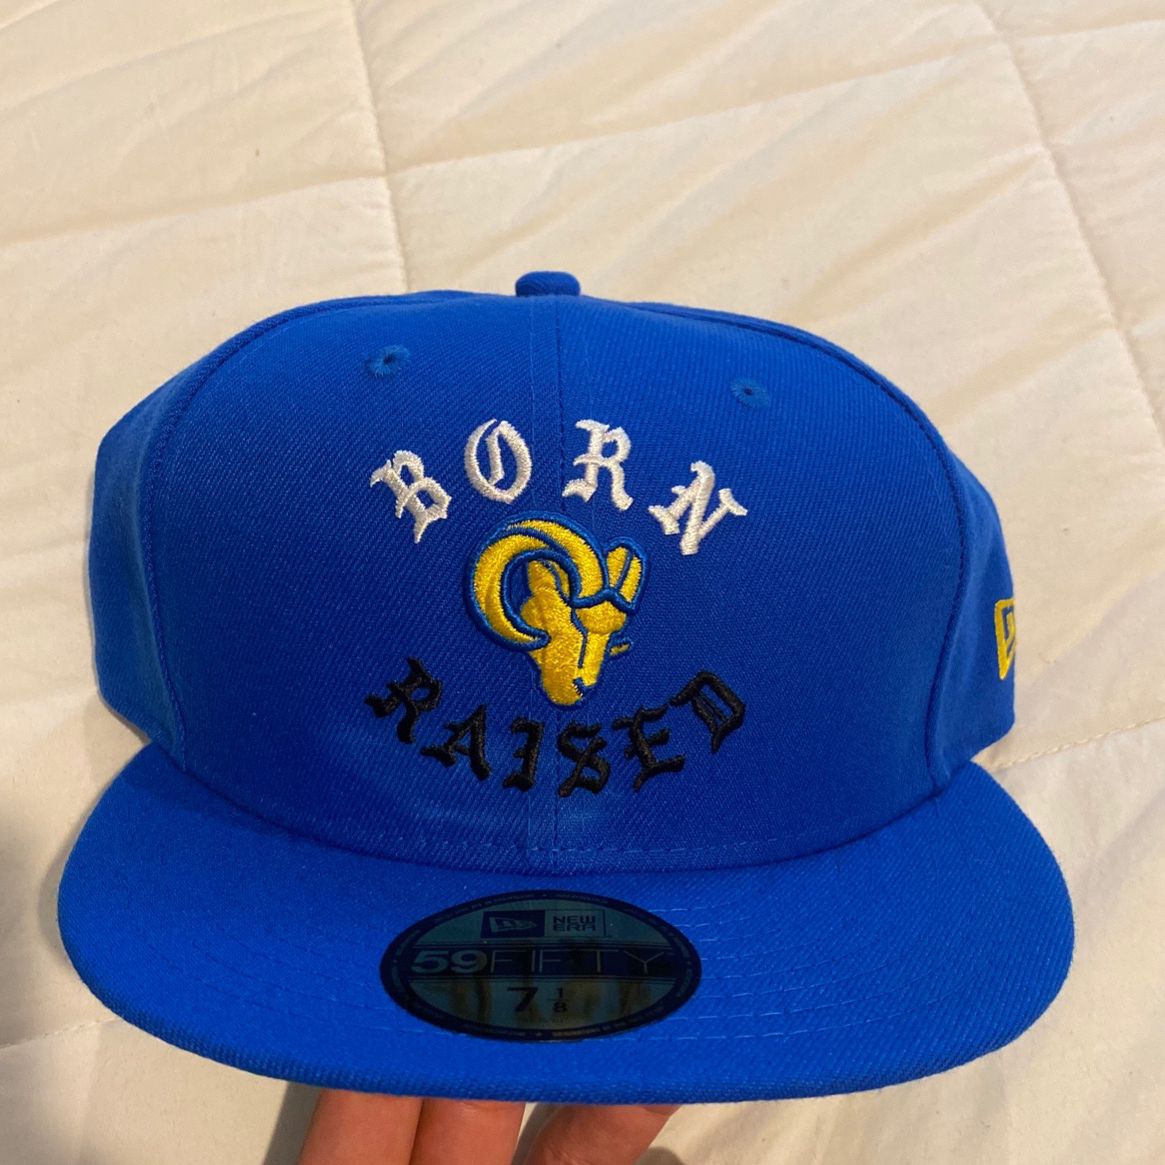 Born X Raised NFL Rams 2.0 New Era Fitted Hat (Blue) for Sale in